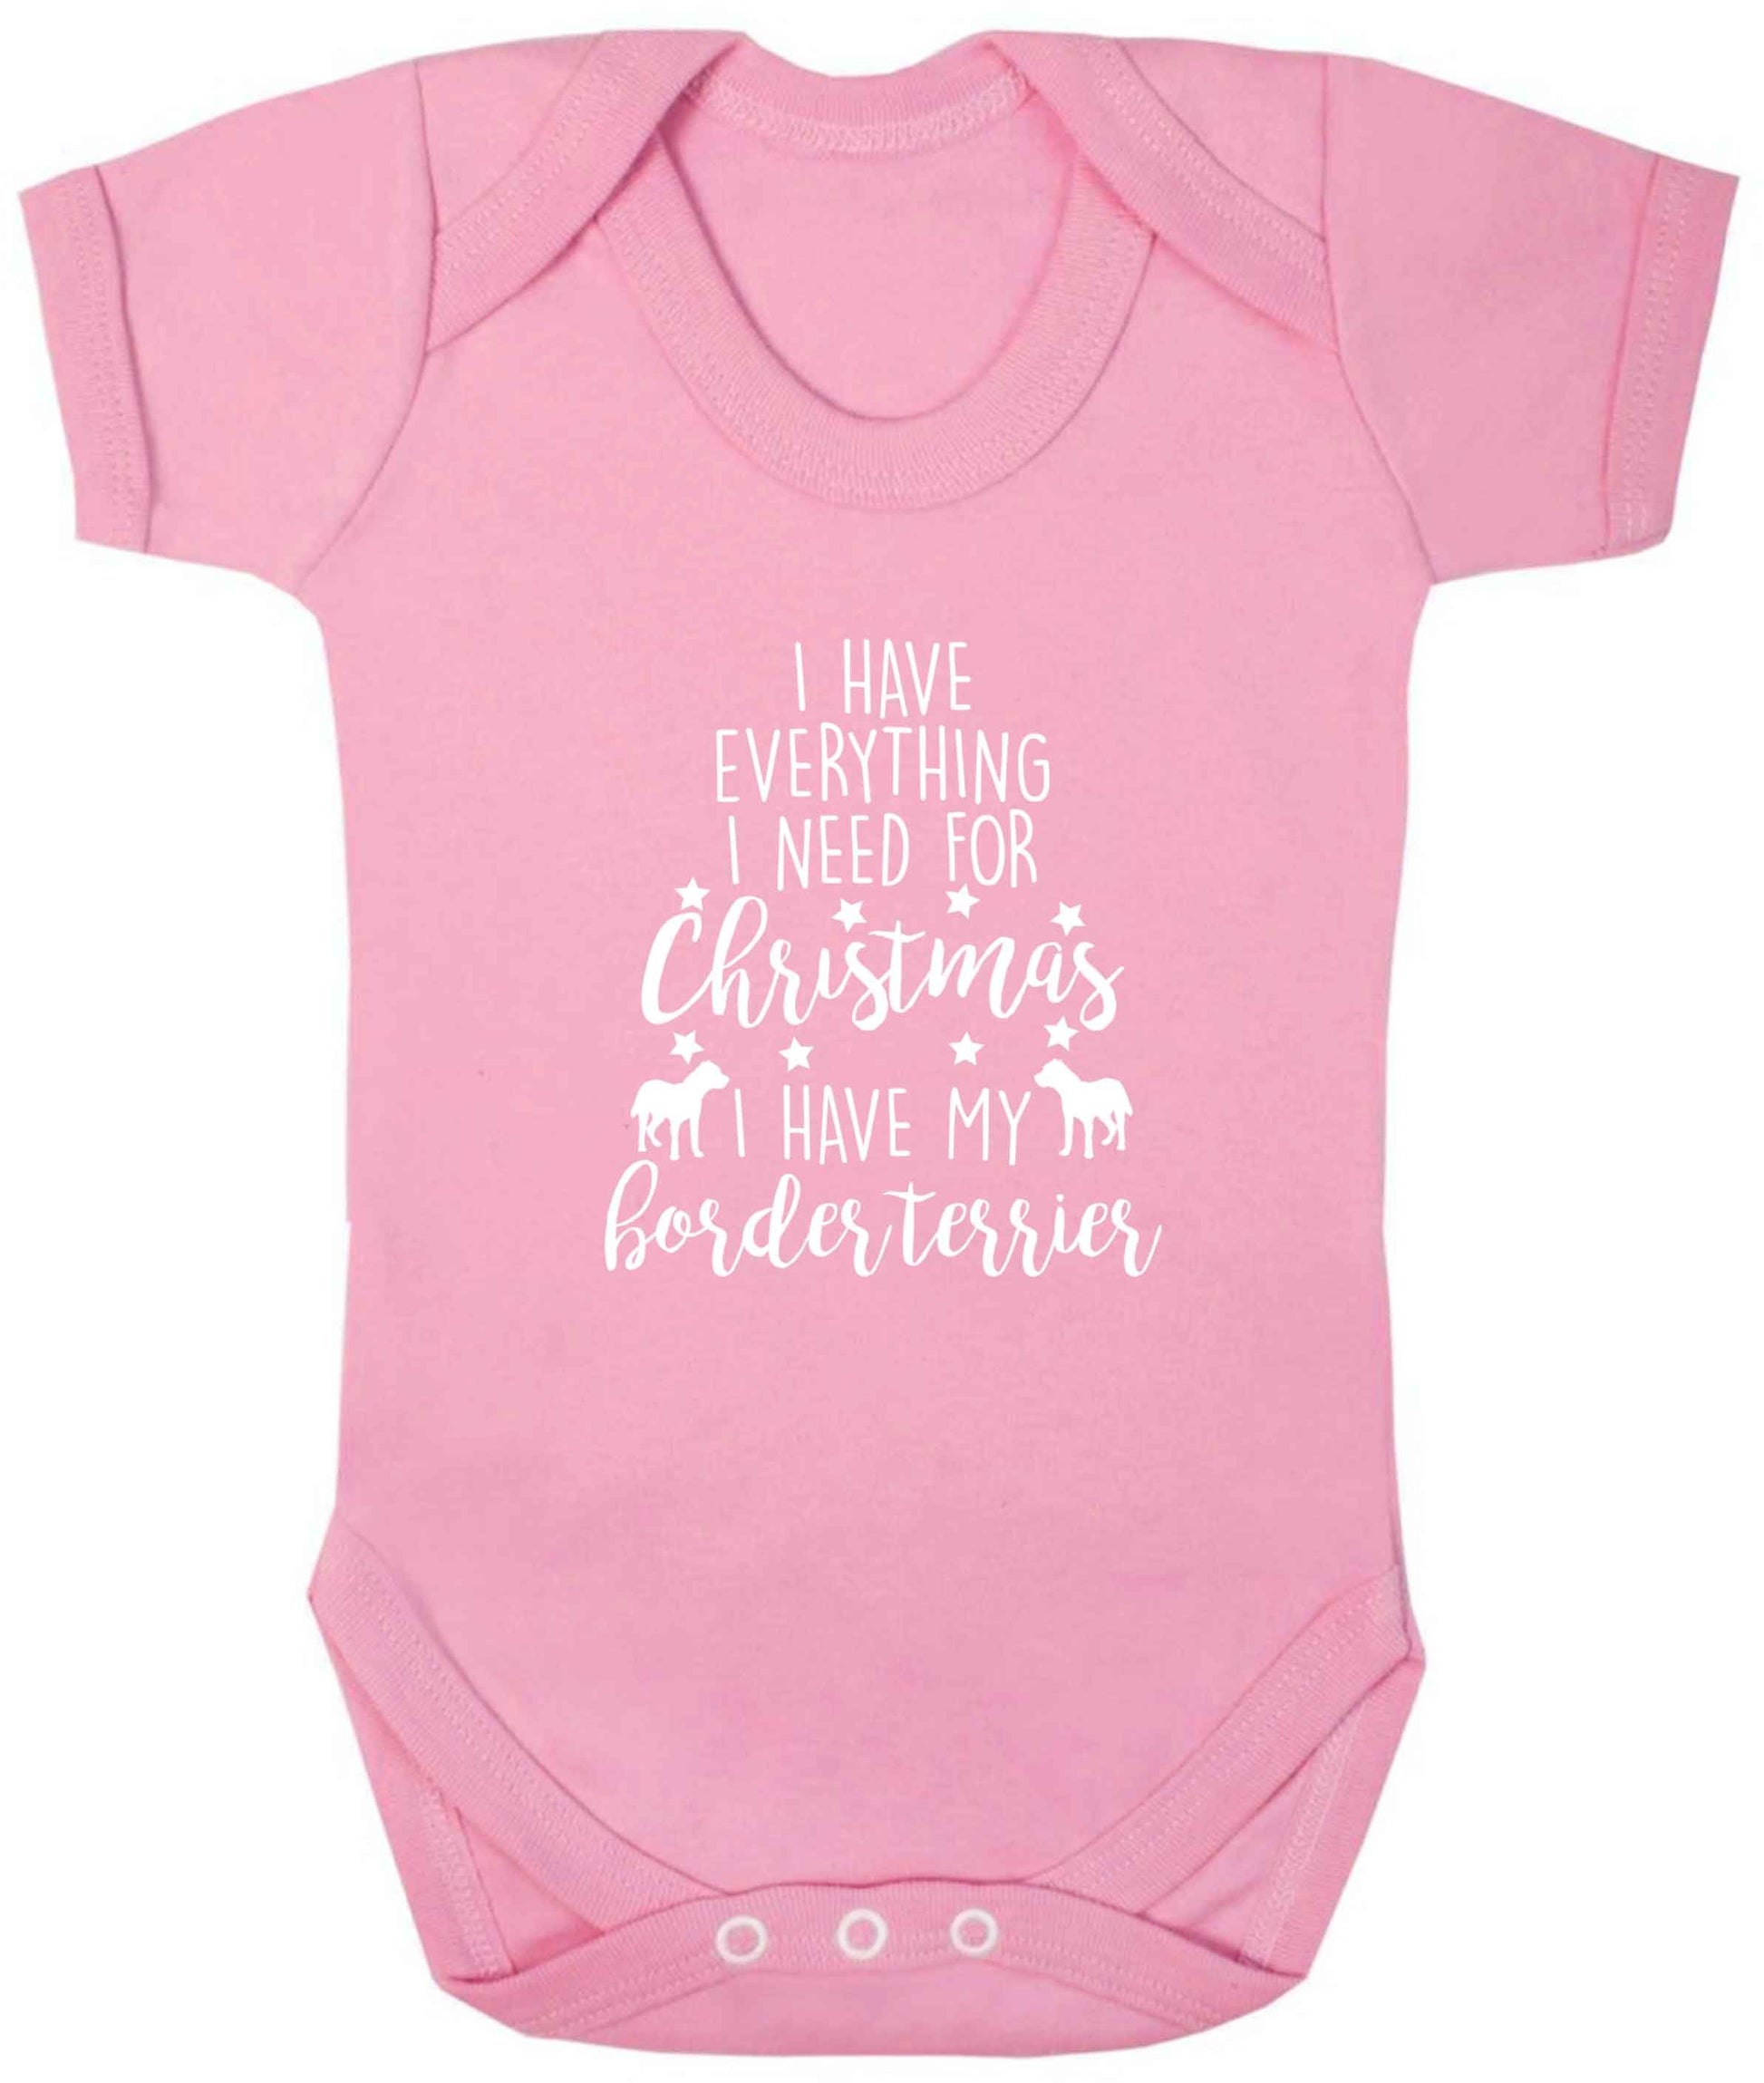 I have everything I need for Christmas I have my border terrier baby vest pale pink 18-24 months